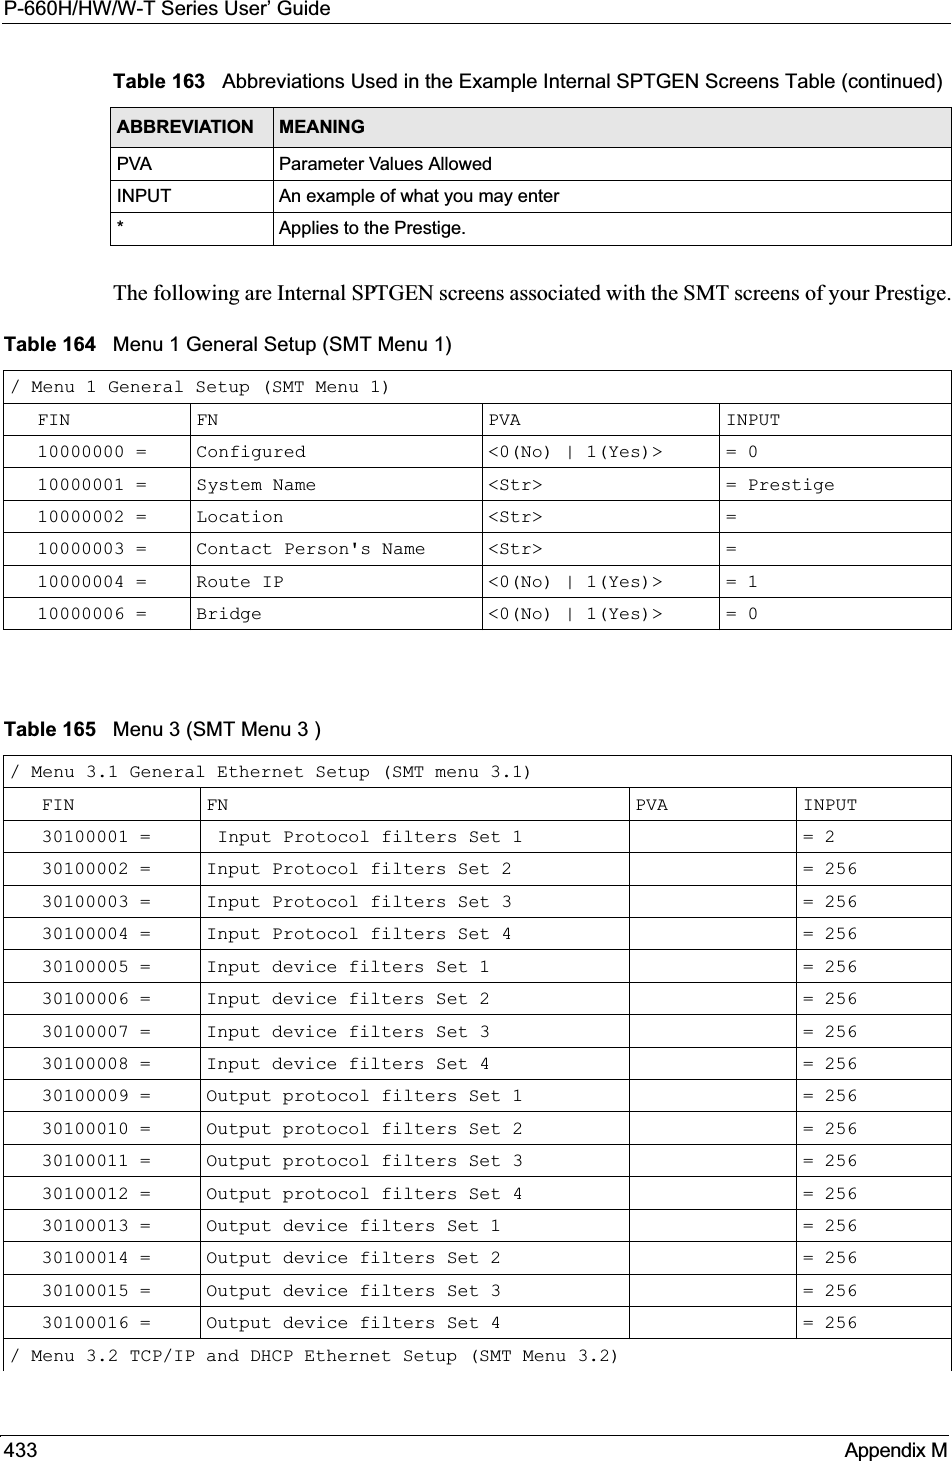 P-660H/HW/W-T Series User’ Guide433 Appendix MThe following are Internal SPTGEN screens associated with the SMT screens of your Prestige.PVA Parameter Values AllowedINPUT An example of what you may enter* Applies to the Prestige.Table 163   Abbreviations Used in the Example Internal SPTGEN Screens Table (continued)ABBREVIATION MEANINGTable 164   Menu 1 General Setup (SMT Menu 1)/ Menu 1 General Setup (SMT Menu 1)FIN FN PVA INPUT  10000000 =  Configured &lt;0(No) | 1(Yes)&gt;  = 010000001 =  System Name &lt;Str&gt; = Prestige10000002 = Location &lt;Str&gt; =10000003 = Contact Person&apos;s Name &lt;Str&gt; =10000004 = Route IP &lt;0(No) | 1(Yes)&gt;  = 110000006 = Bridge &lt;0(No) | 1(Yes)&gt;  = 0Table 165   Menu 3 (SMT Menu 3 )/ Menu 3.1 General Ethernet Setup (SMT menu 3.1)FIN FN PVA INPUT30100001 =  Input Protocol filters Set 1       = 230100002 = Input Protocol filters Set 2       = 25630100003 = Input Protocol filters Set 3       = 25630100004 = Input Protocol filters Set 4  = 25630100005 = Input device filters Set 1       = 25630100006 = Input device filters Set 2  = 25630100007 = Input device filters Set 3  = 25630100008 = Input device filters Set 4  = 25630100009 = Output protocol filters Set 1  = 25630100010 = Output protocol filters Set 2  = 25630100011 = Output protocol filters Set 3  = 25630100012 = Output protocol filters Set 4  = 25630100013 = Output device filters Set 1  = 25630100014 = Output device filters Set 2  = 25630100015 = Output device filters Set 3  = 25630100016 = Output device filters Set 4  = 256/ Menu 3.2 TCP/IP and DHCP Ethernet Setup (SMT Menu 3.2)